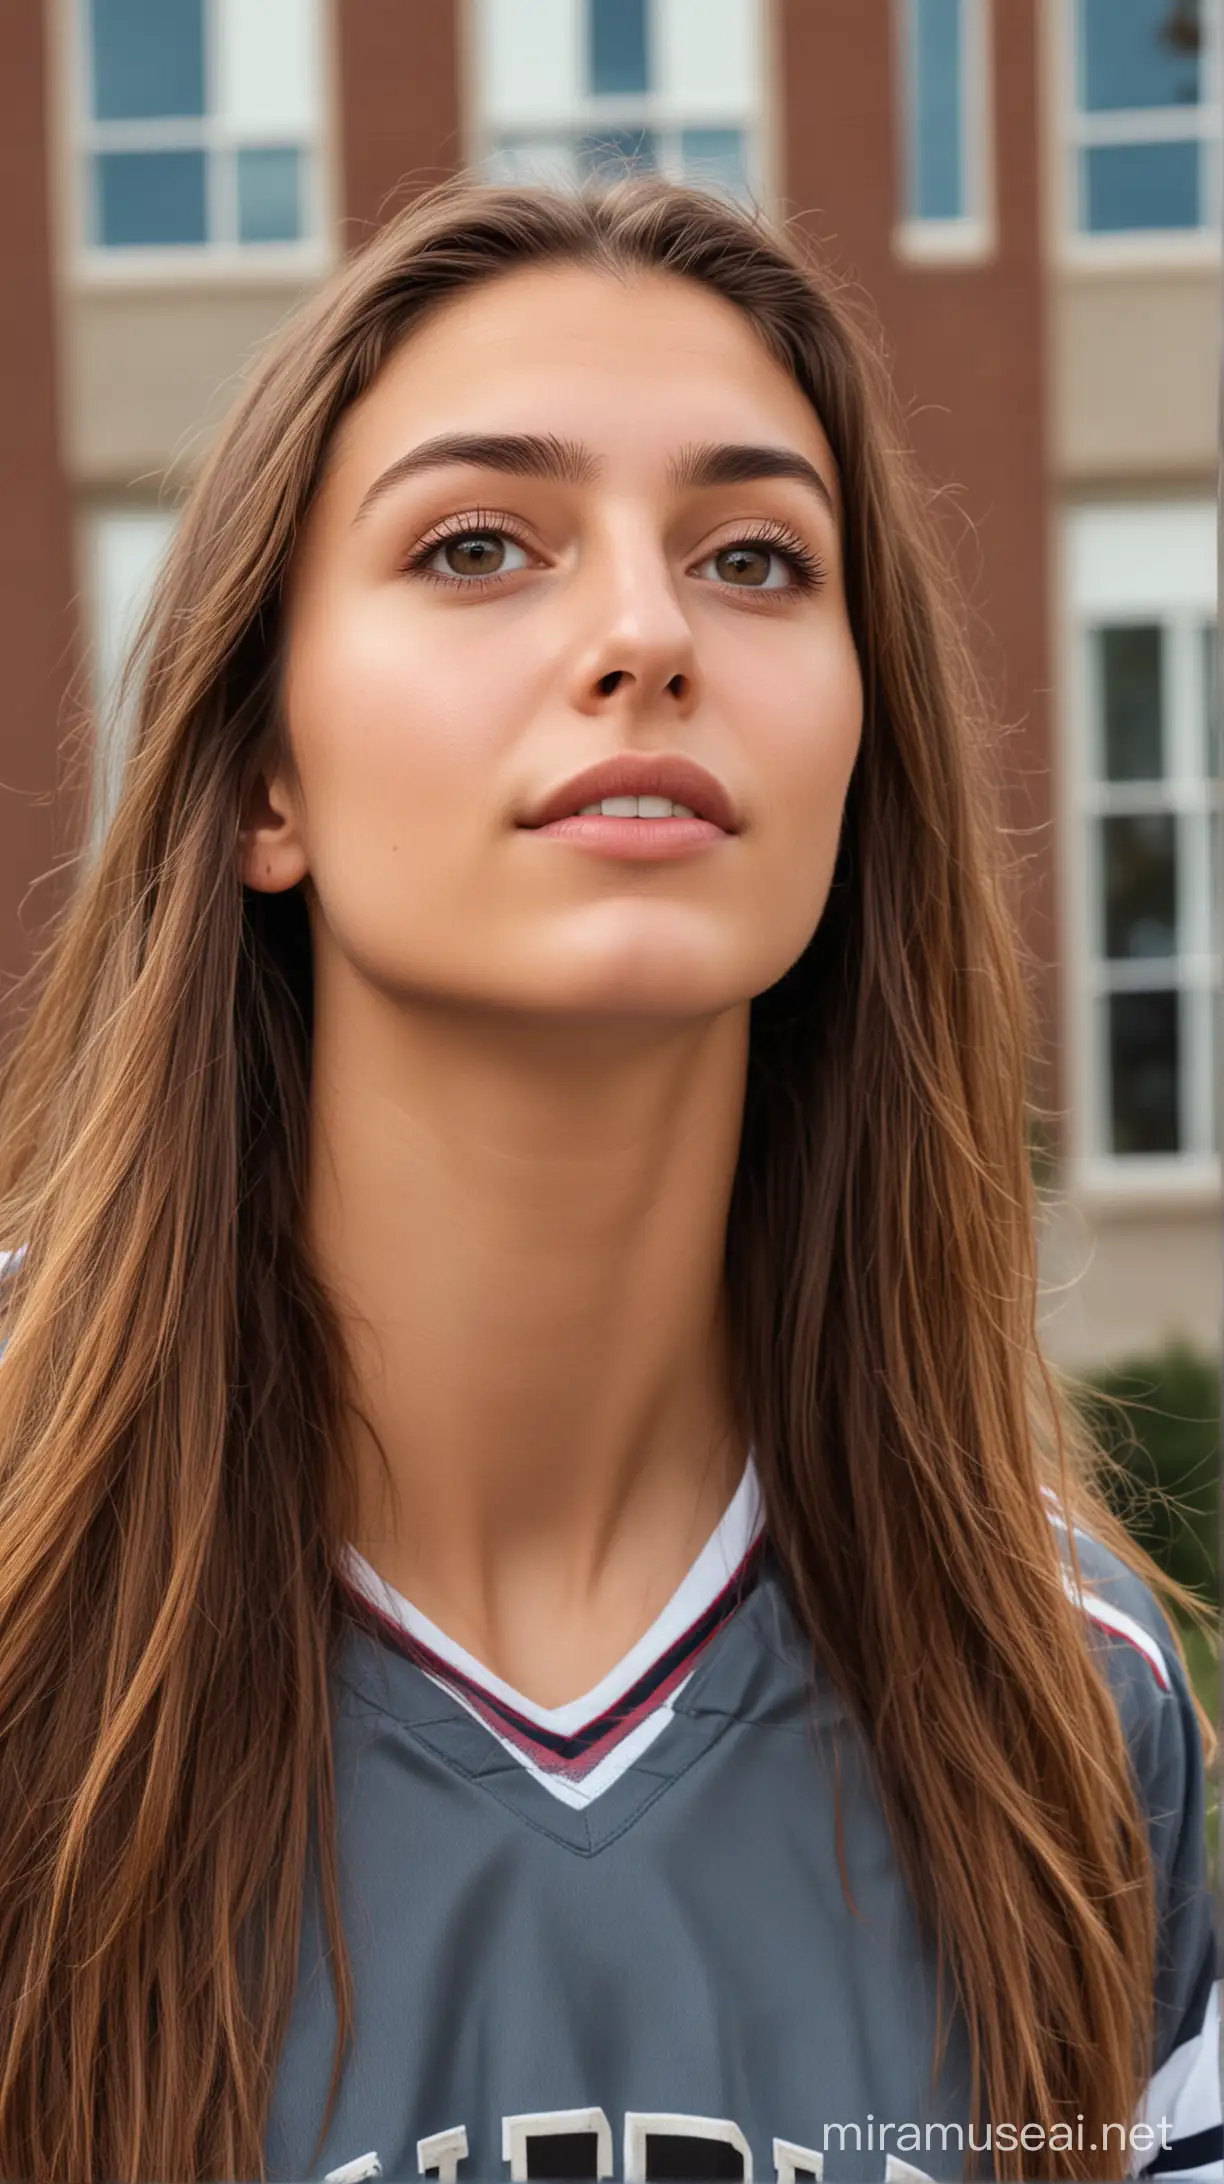 a realistic photo of a very pretty 19 year old woman with long brown hair, looking up at a handsome man wearing a hockey jersey, in front of college campus